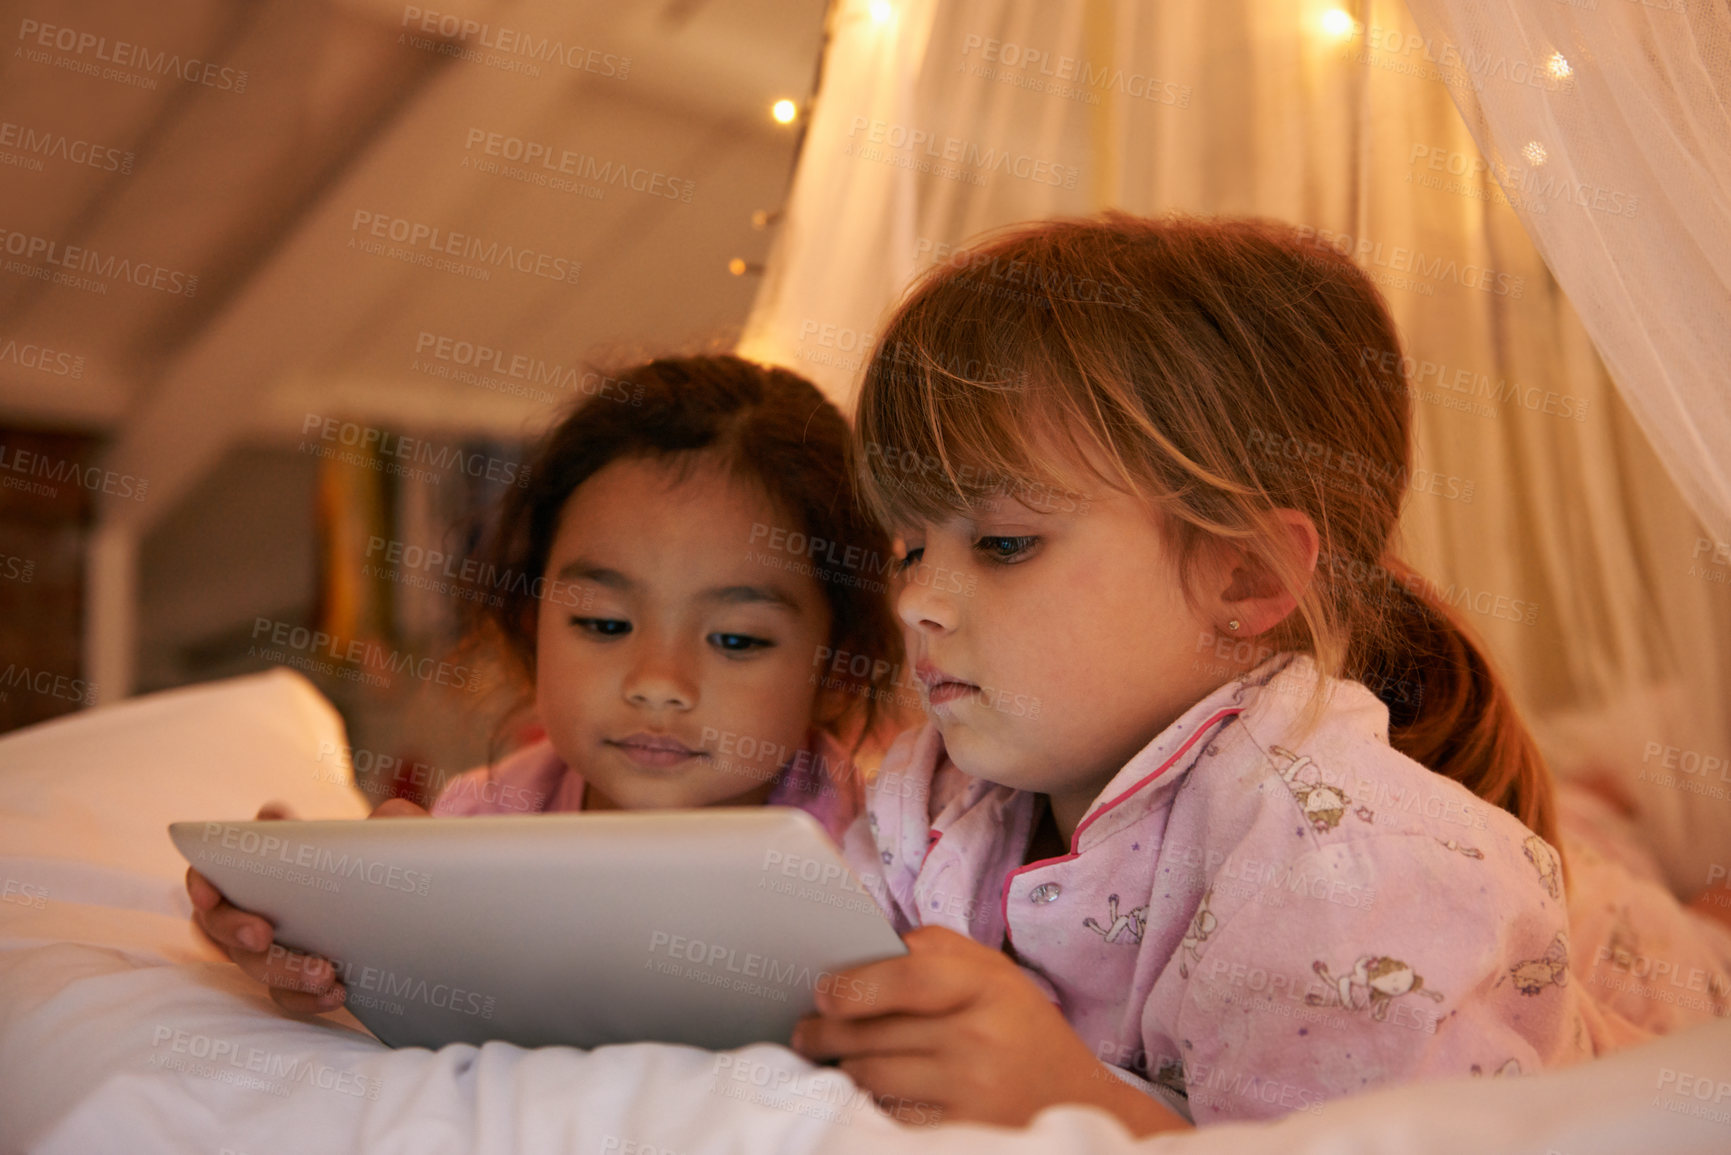 Buy stock photo Girls, tablet or games on bed at night, playing or digital technology for cartoons with love in home. Young kids, friends or connection by fairy light, tent or streaming video for bonding together